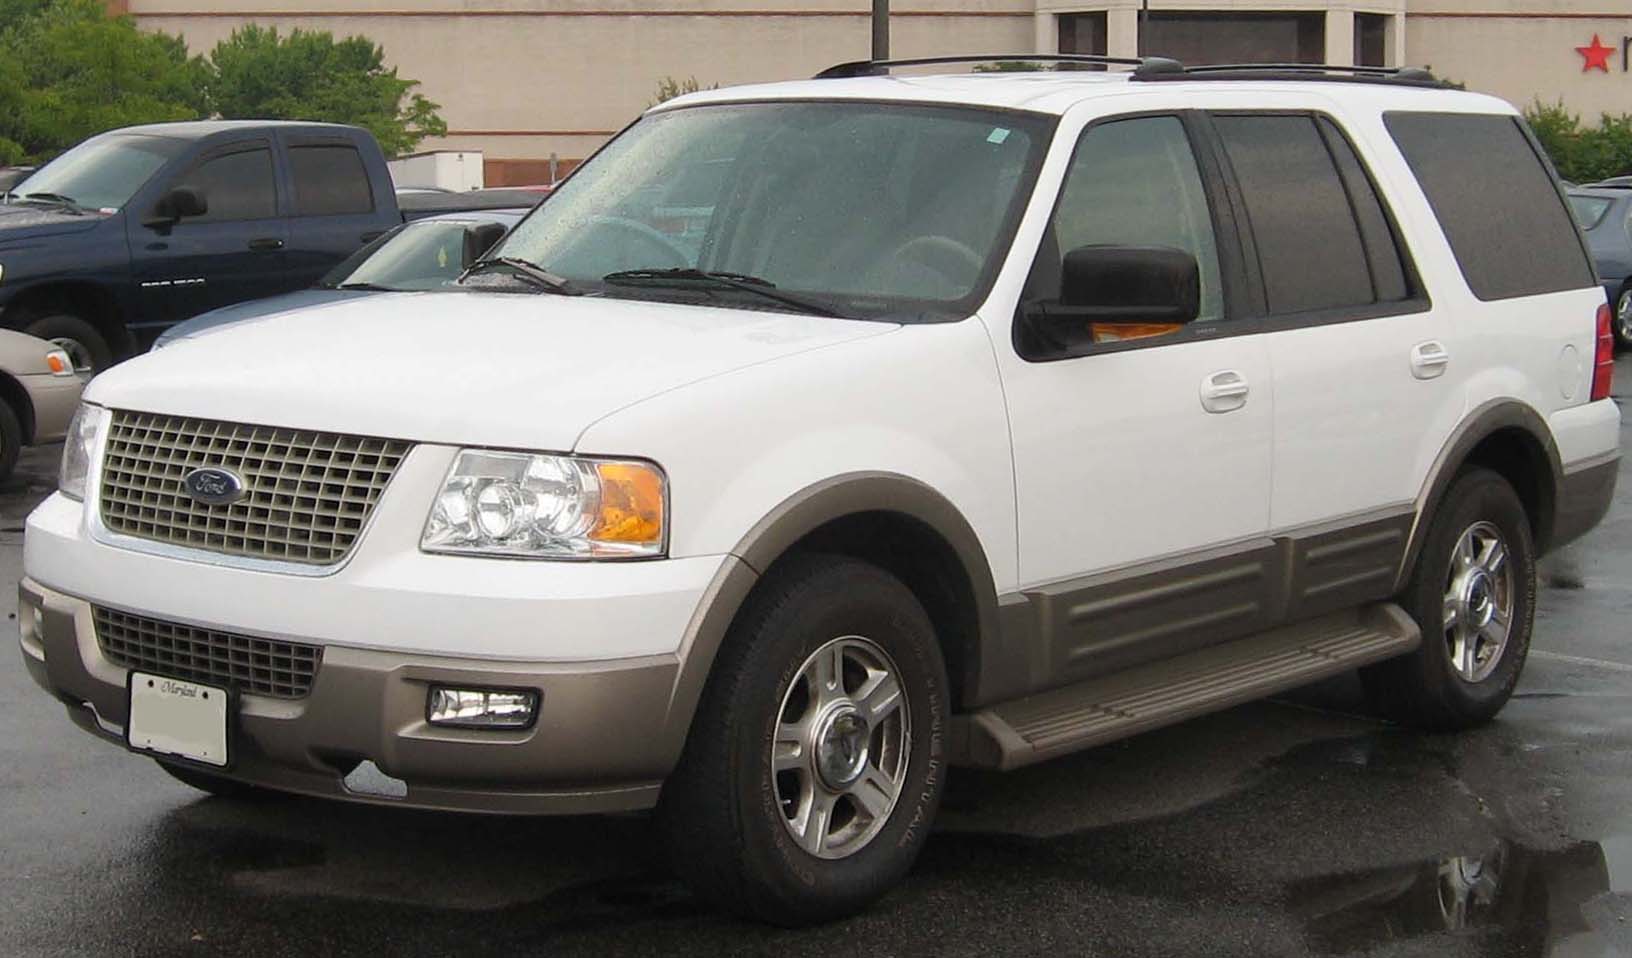 What is the length of a 2005 ford expedition